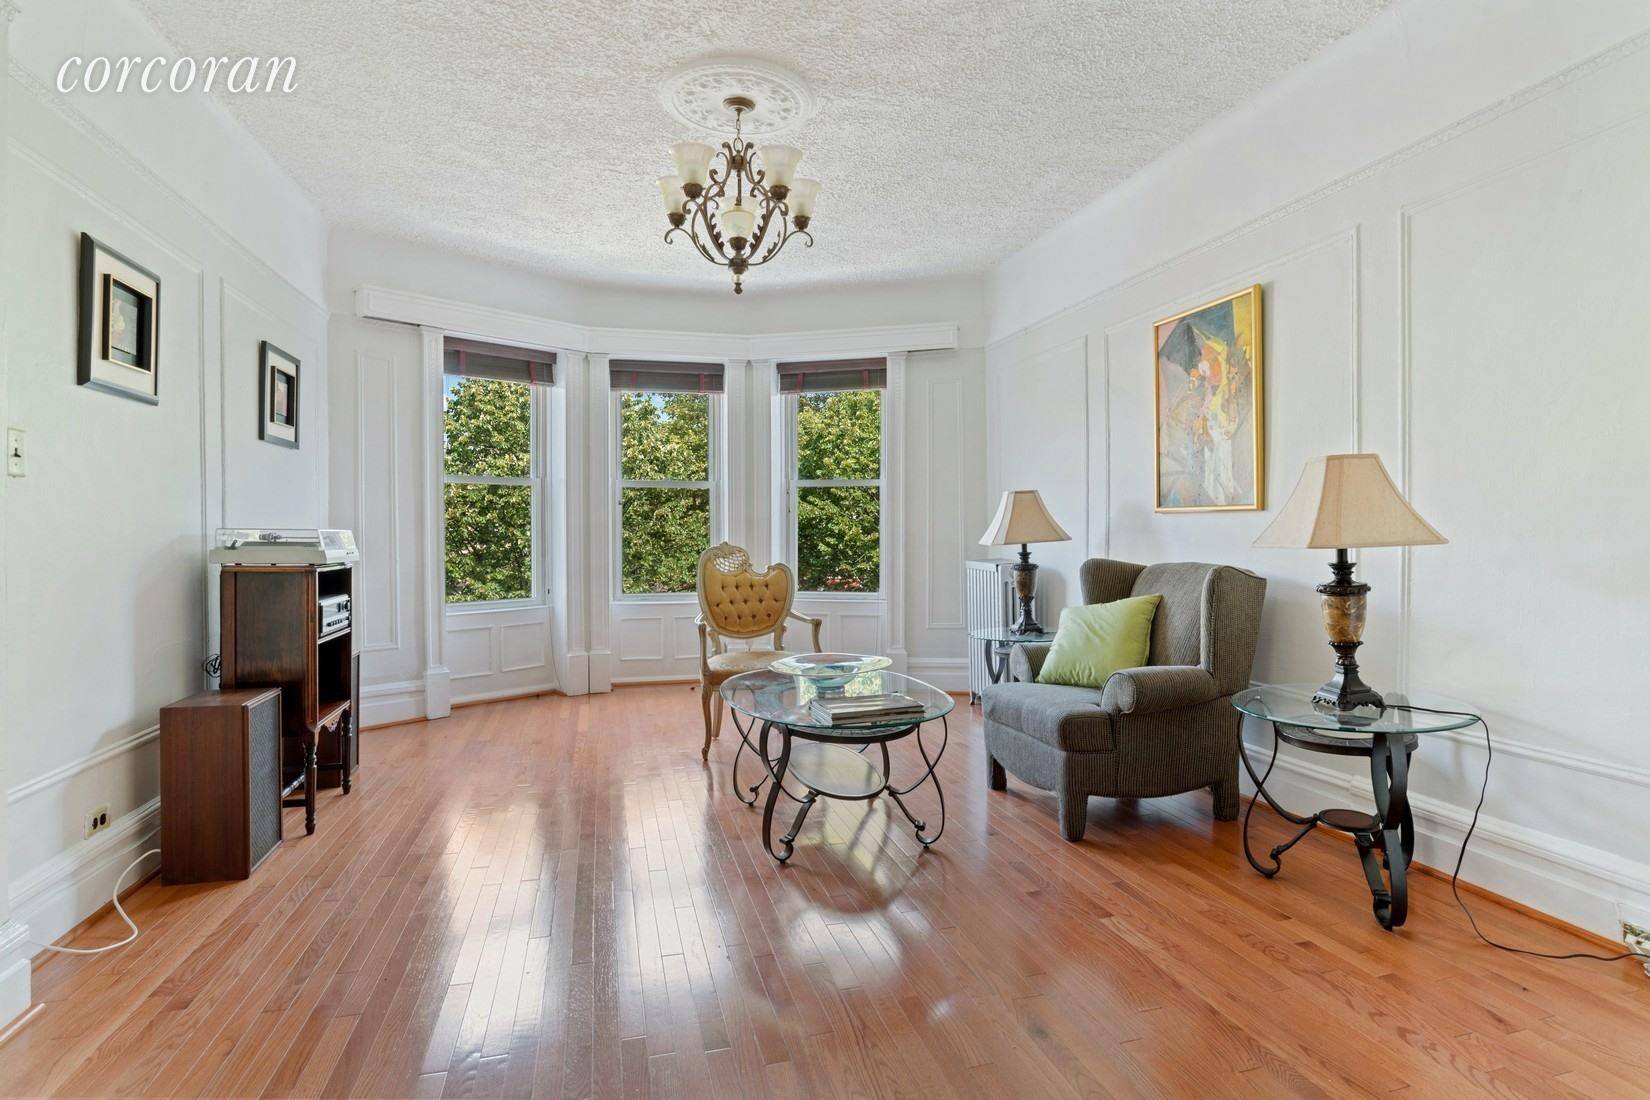 Price ReductionWelcome to 212 Lefferts avenue a beautiful Two Family Home on Brooklyn's Greenest block !